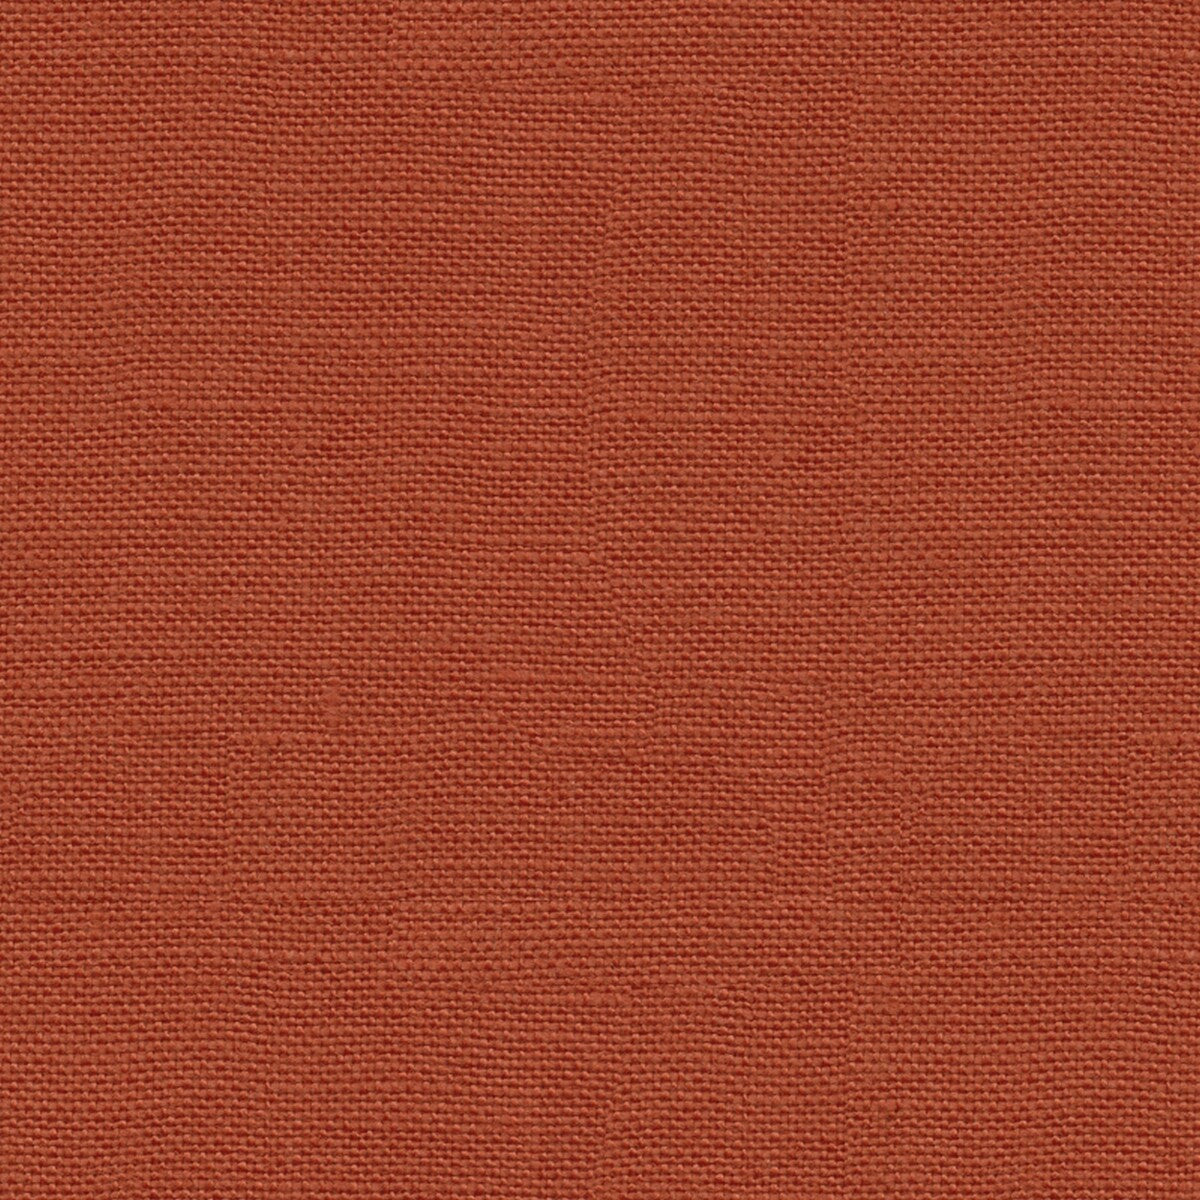 Lea fabric in terracotta color - pattern J0337.390.0 - by G P &amp; J Baker in the Country Weekend collection